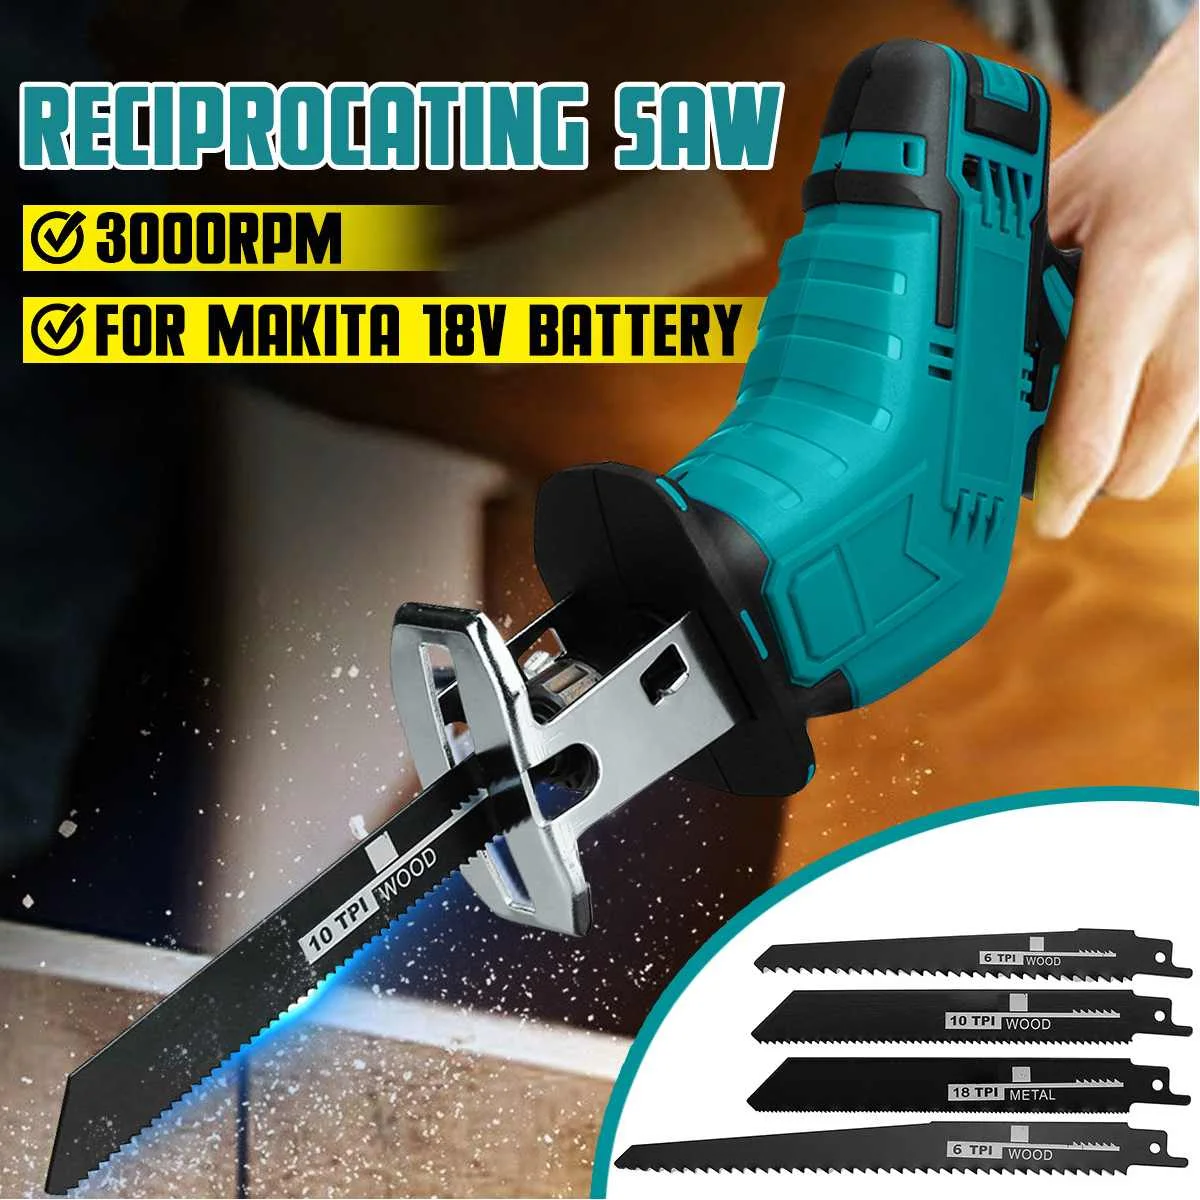 18V 3000rpm/min Cordless Reciprocating Saw with 4 Blades Metal Wood Cutting Machine Electric Saw for Makita 18V Battery